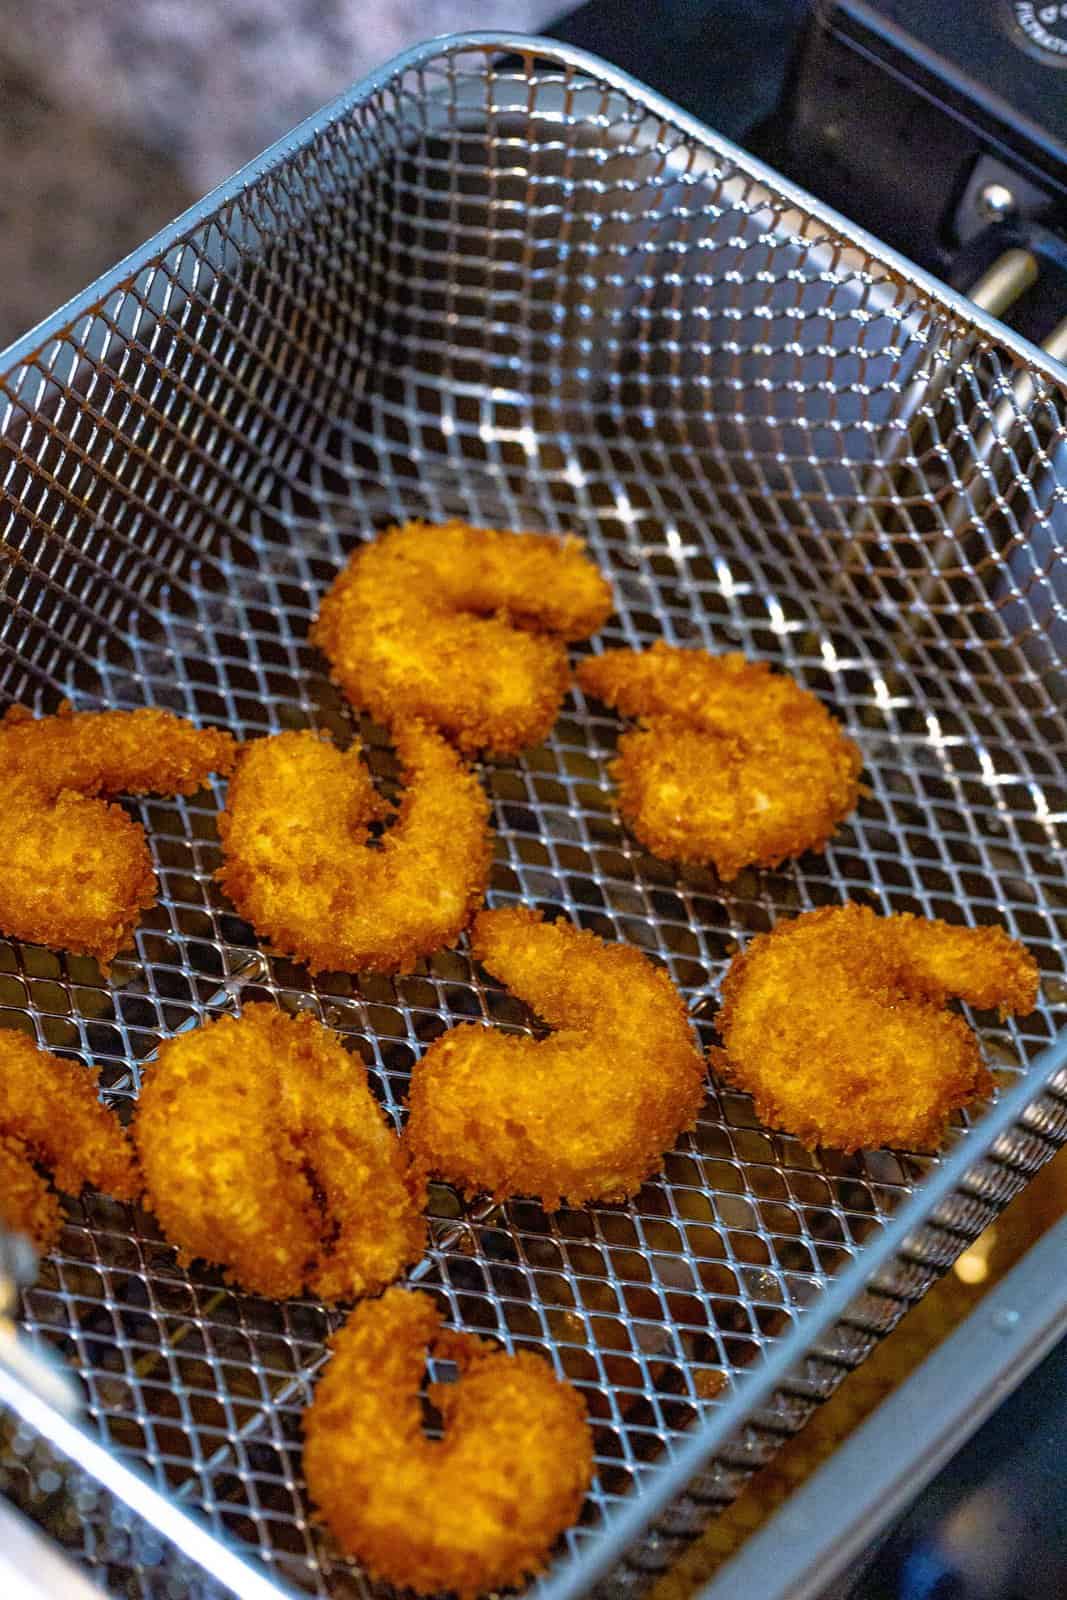 Shrimp coming out of fryer.